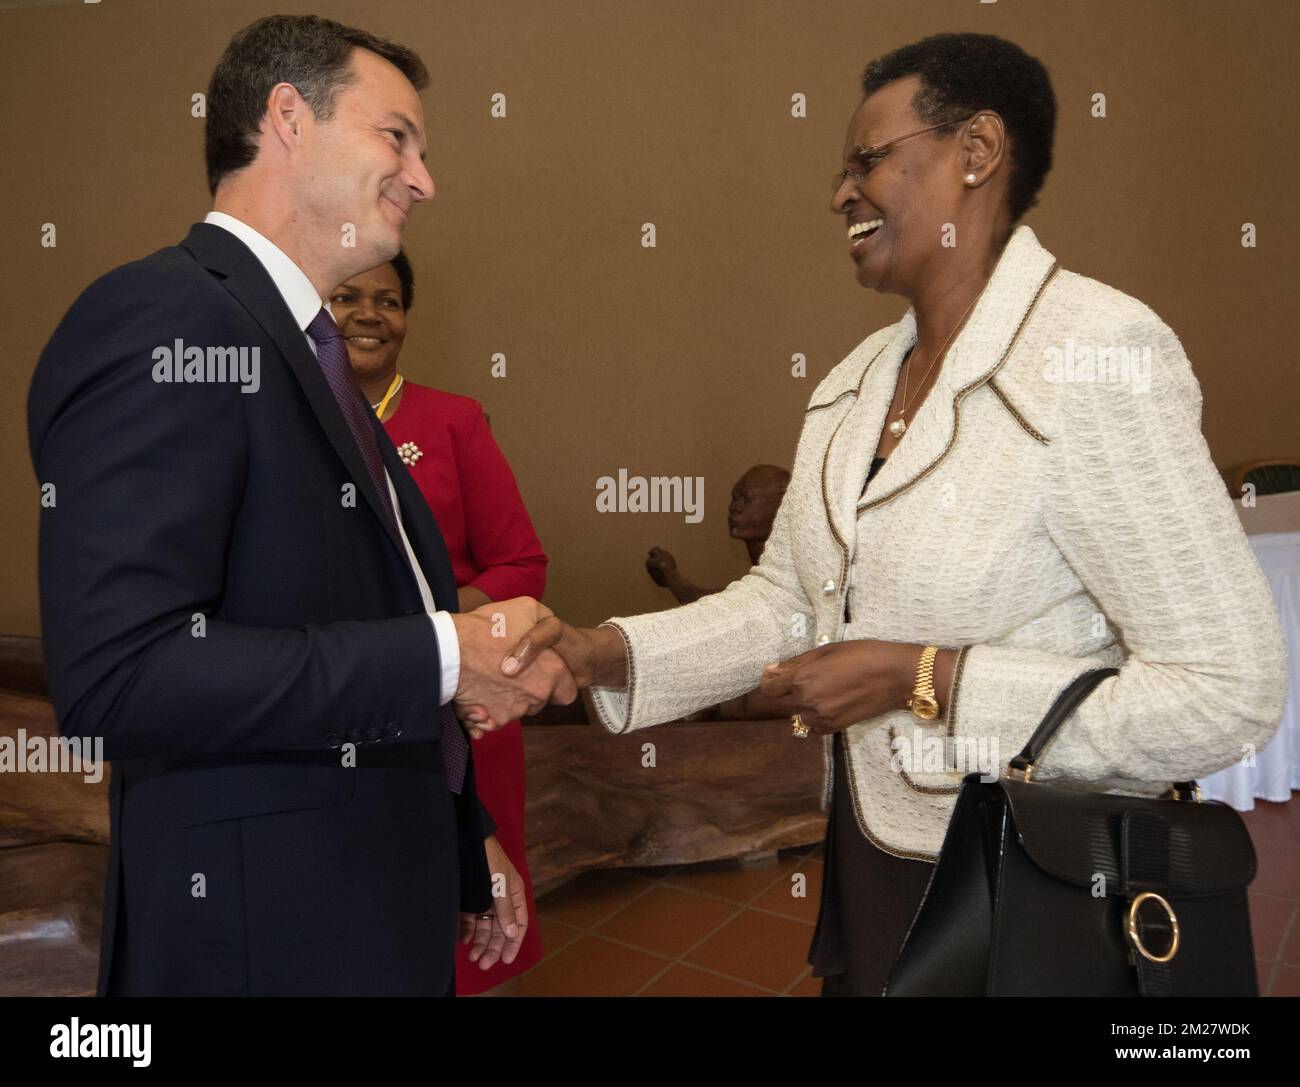 Ugandan President Yoweri Museveni's wife Janet Museveni meets with Vice-Prime Minister and Minister of Cooperation Development, Digital Agenda, Telecom and Postal services Alexander De Croo during a fundraising summit to help the country deal with nearly a million South Sudanese fleeing war. The summit hopes to raise at least $2 billion (1.8 billion euros) to help tackle the world's fastest-growing refugee crisis triggered by continuing civil war in South Sudan. BELGA PHOTO BENOIT DOPPAGNE Stock Photo